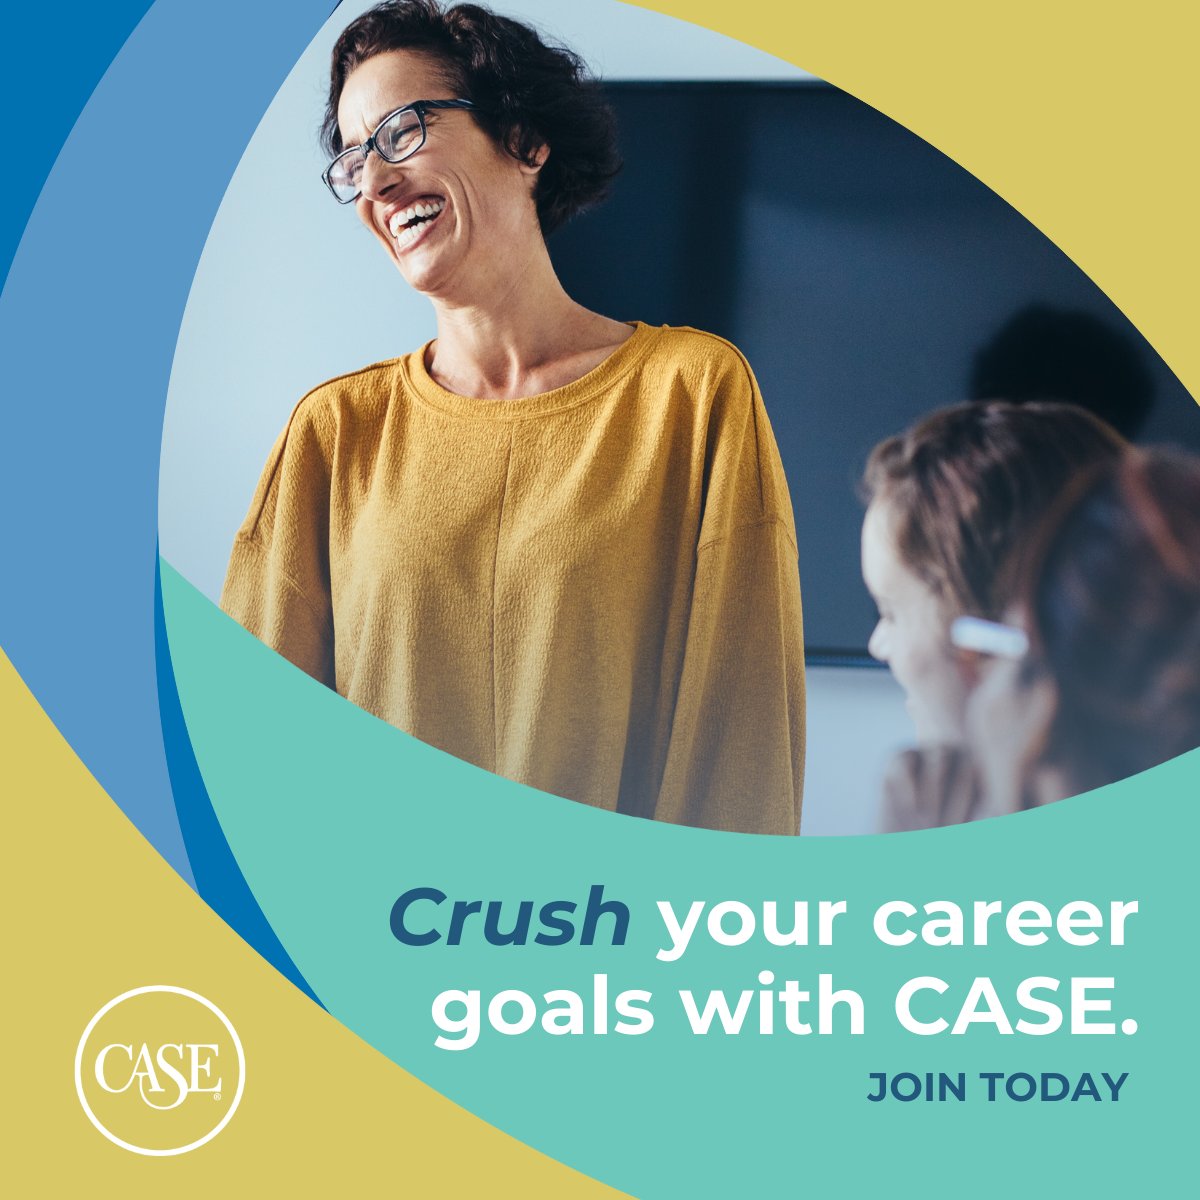 You’ve made your personal and professional resolutions for the new year. Now you just need to figure out how to achieve them. CASE membership can be a resource for you to crush those goals early and often. hubs.ly/Q029DZ9V0